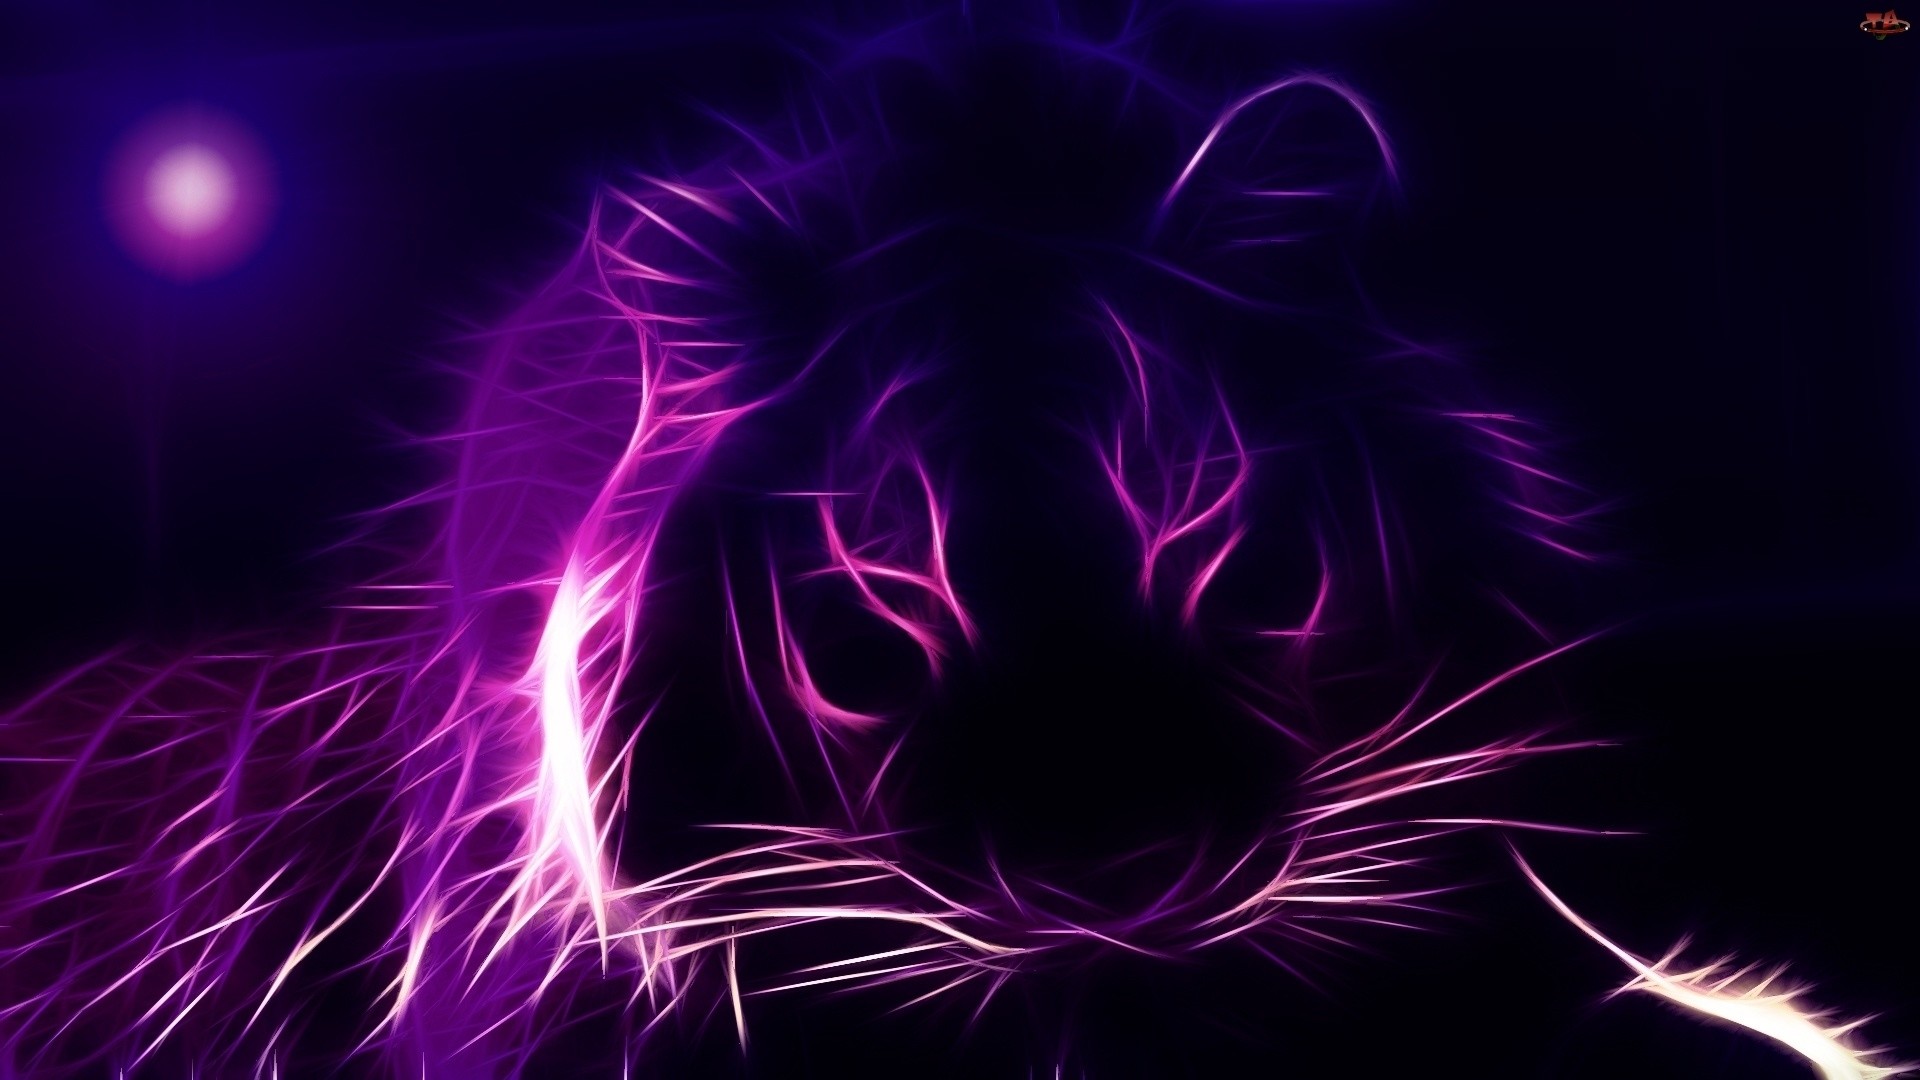 1920x1080 Best Colors To Choose For Wallpaper Hd Cool Design Inspiration Lion  Abstrac. decor design. ...